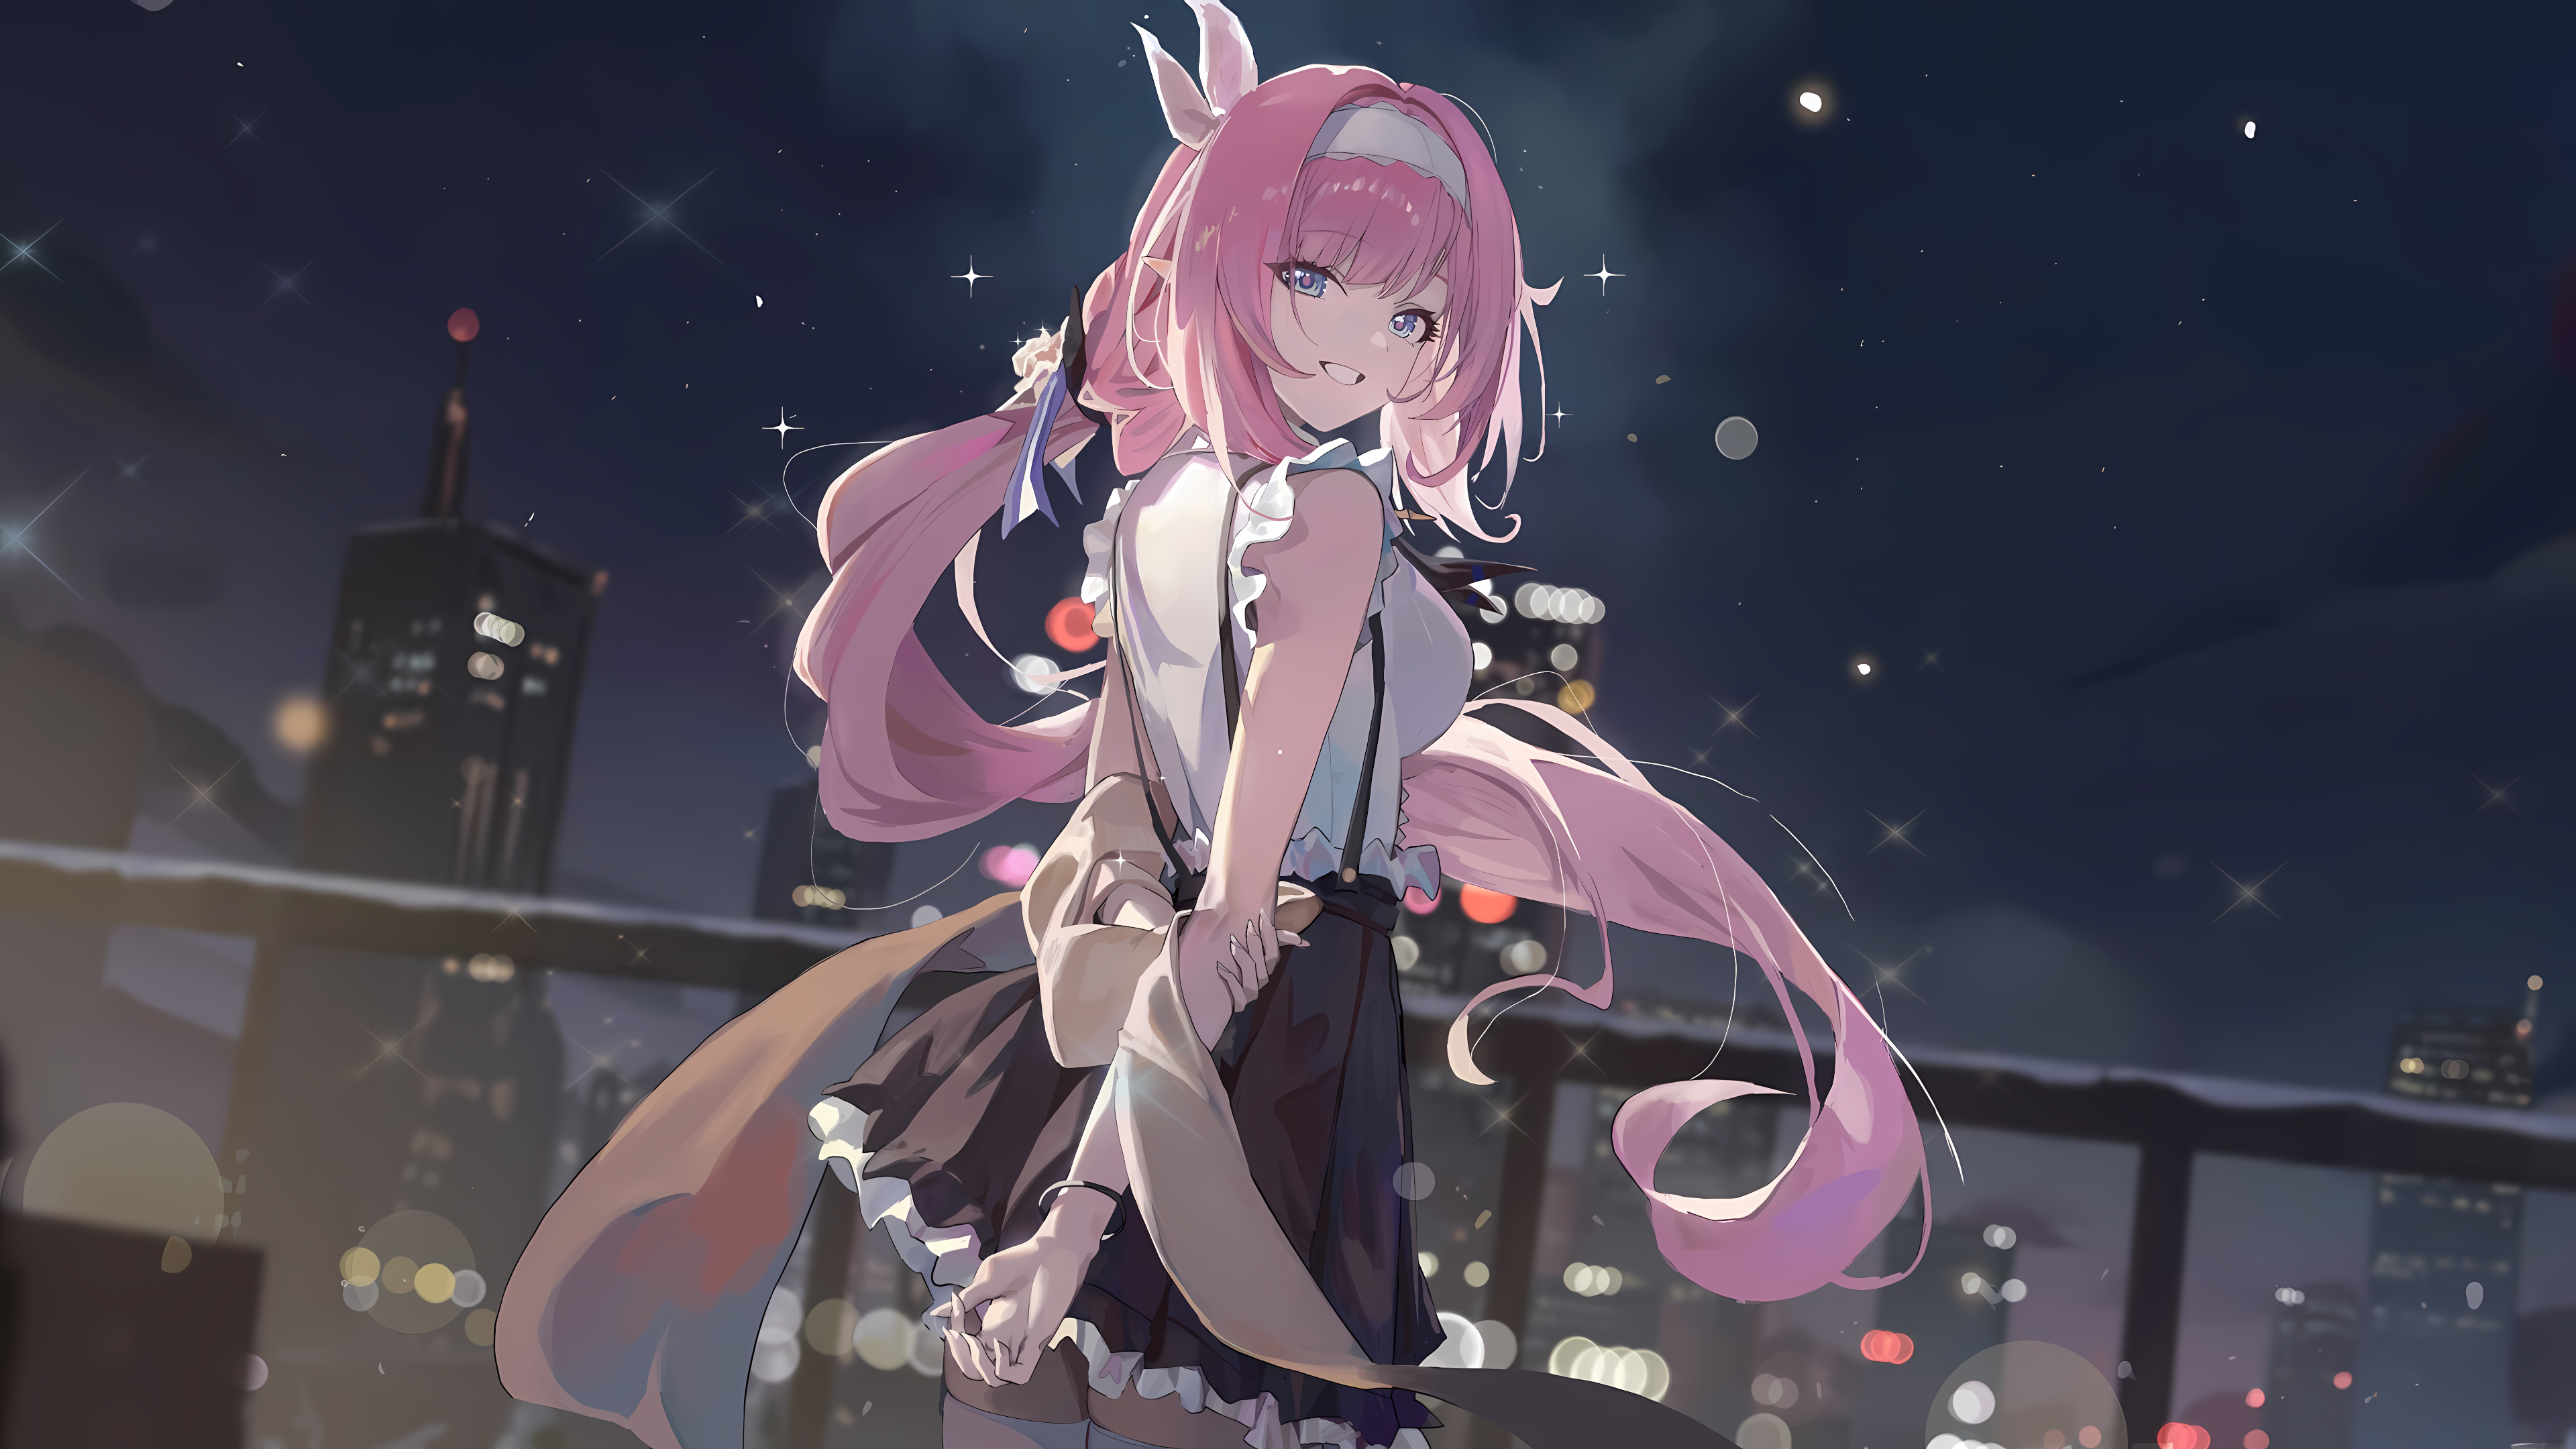 Anime 3840x2160 Elysia (Honkai Impact 3rd) Honkai Impact 3rd maid anime girls maid outfit Honkai Impact night sky stars skirt frills dress standing looking at viewer smiling building city lights blurred blurry background long hair pink hair blue eyes pointy ears arm(s) behind back bracelets bare shoulders